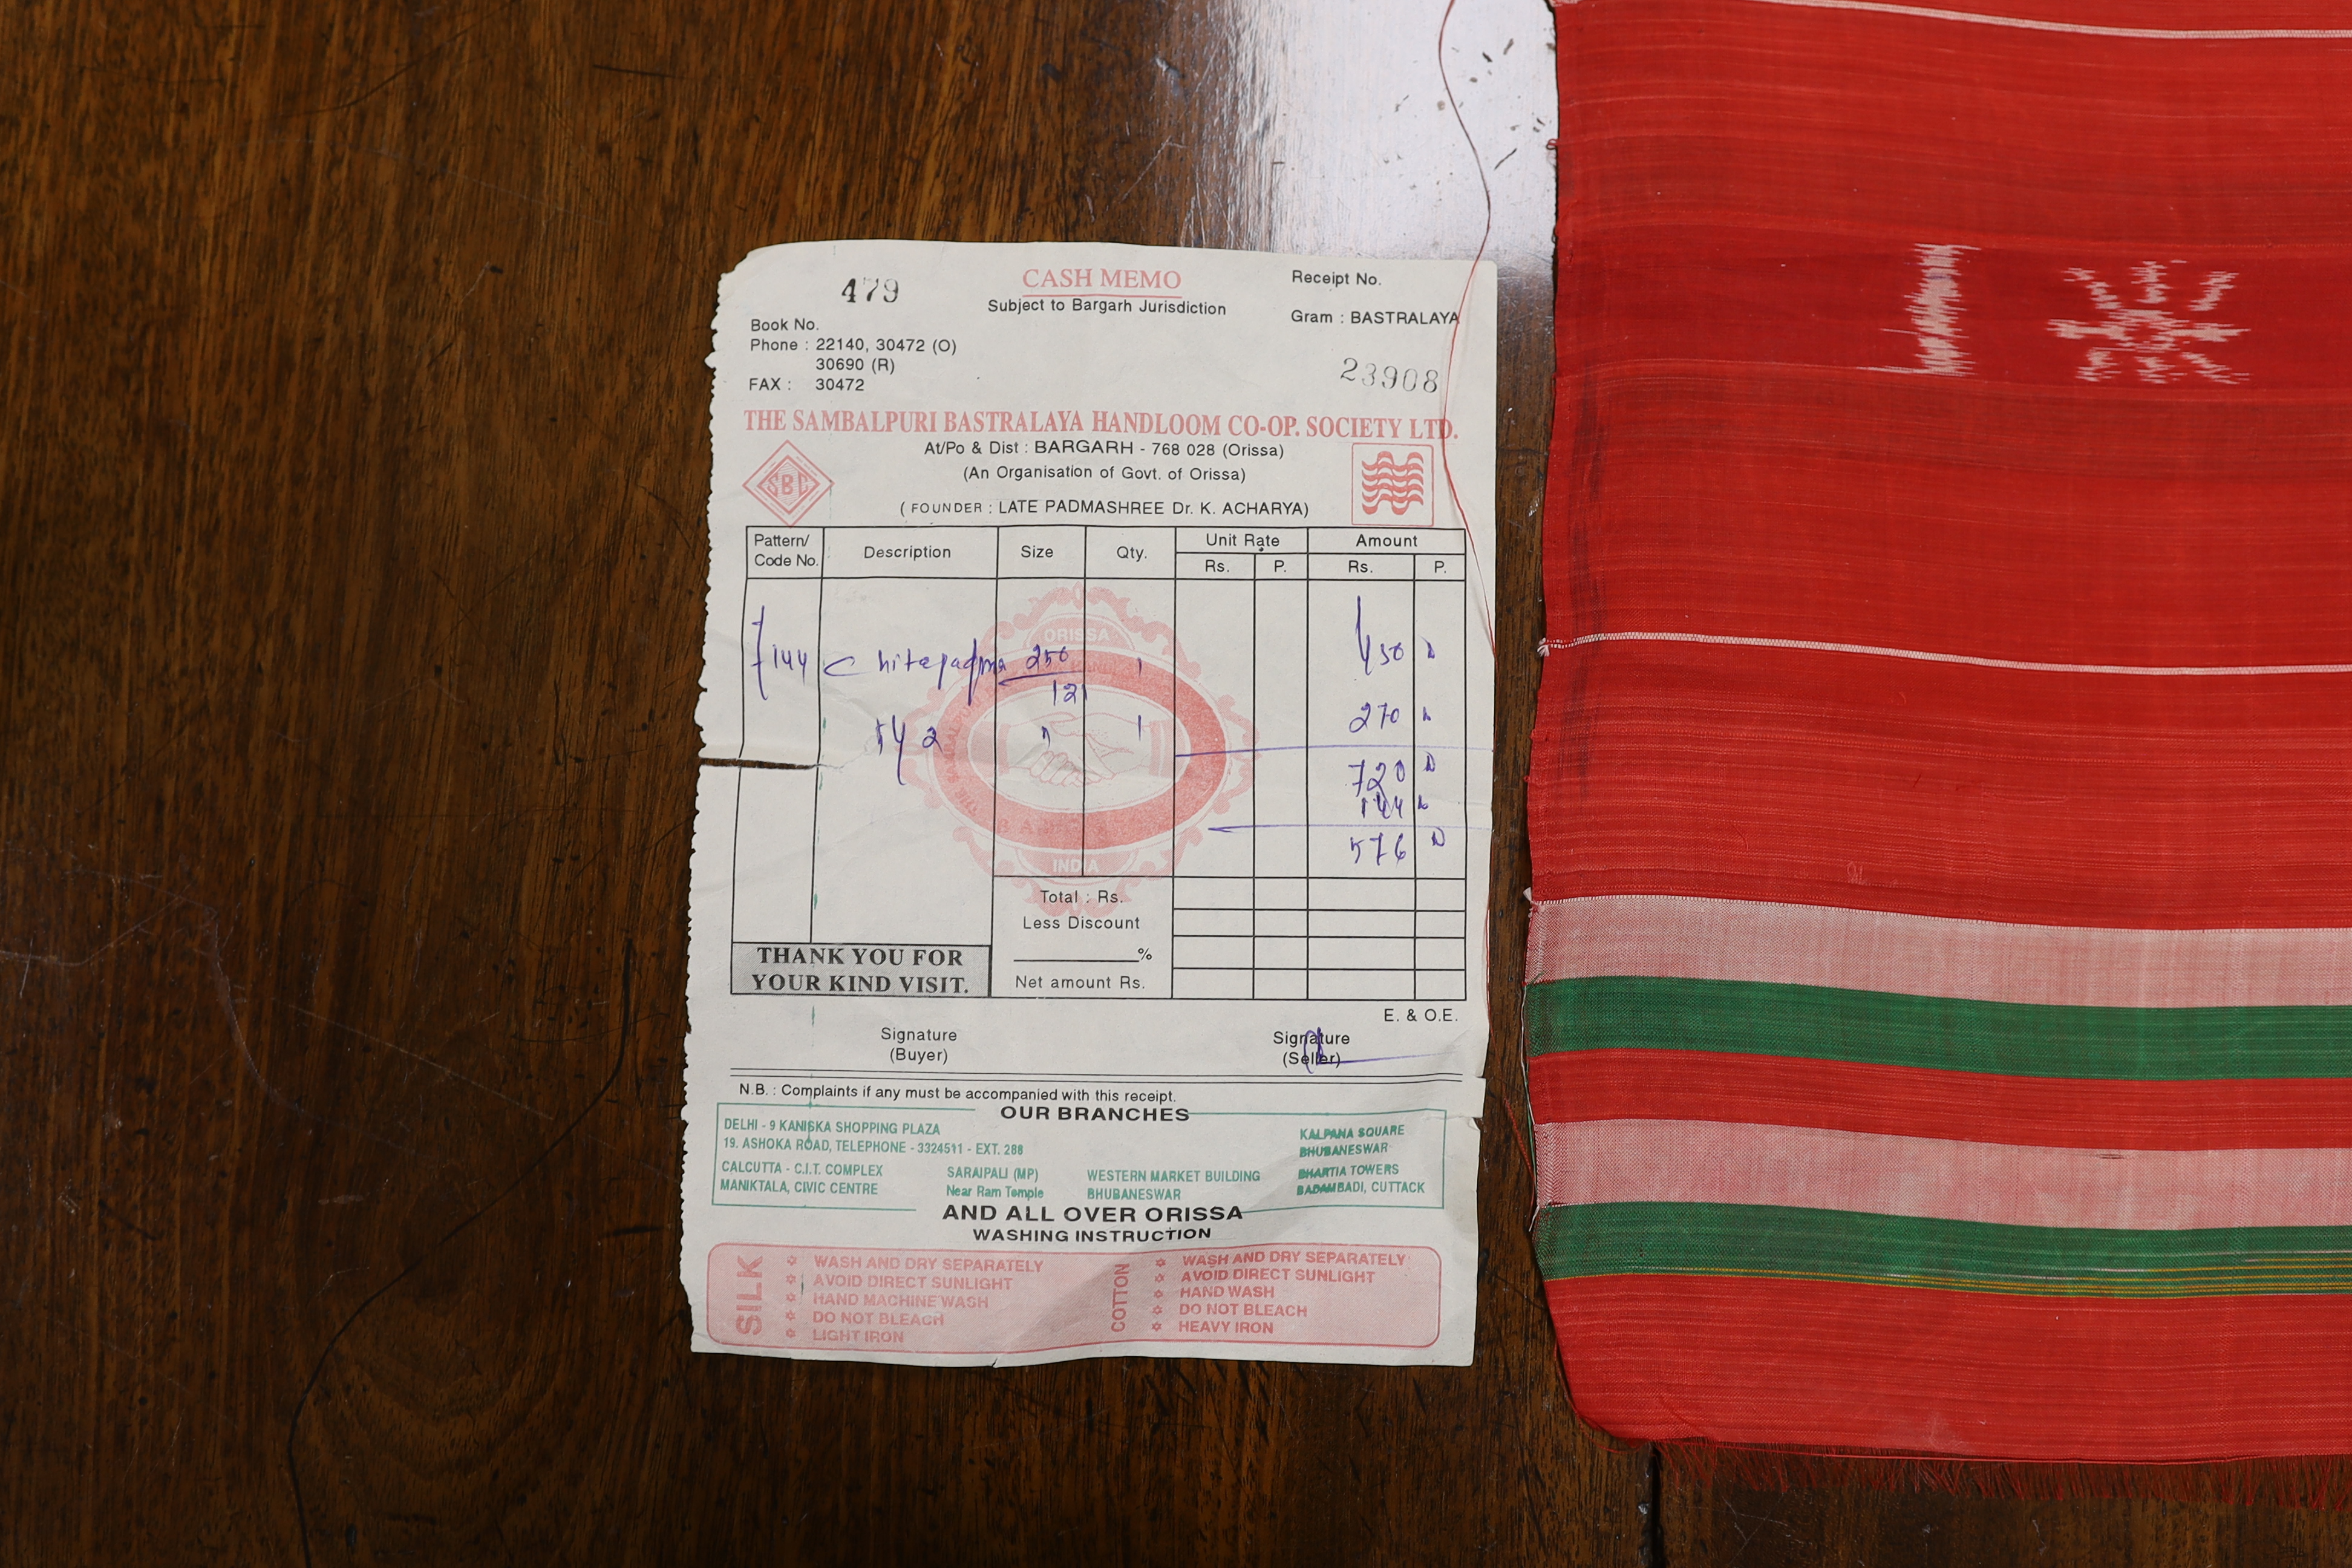 An Indian silk woven cloth, possibly a temple cloth, from Orissa, printed on the warp, with original receipt and paper bag